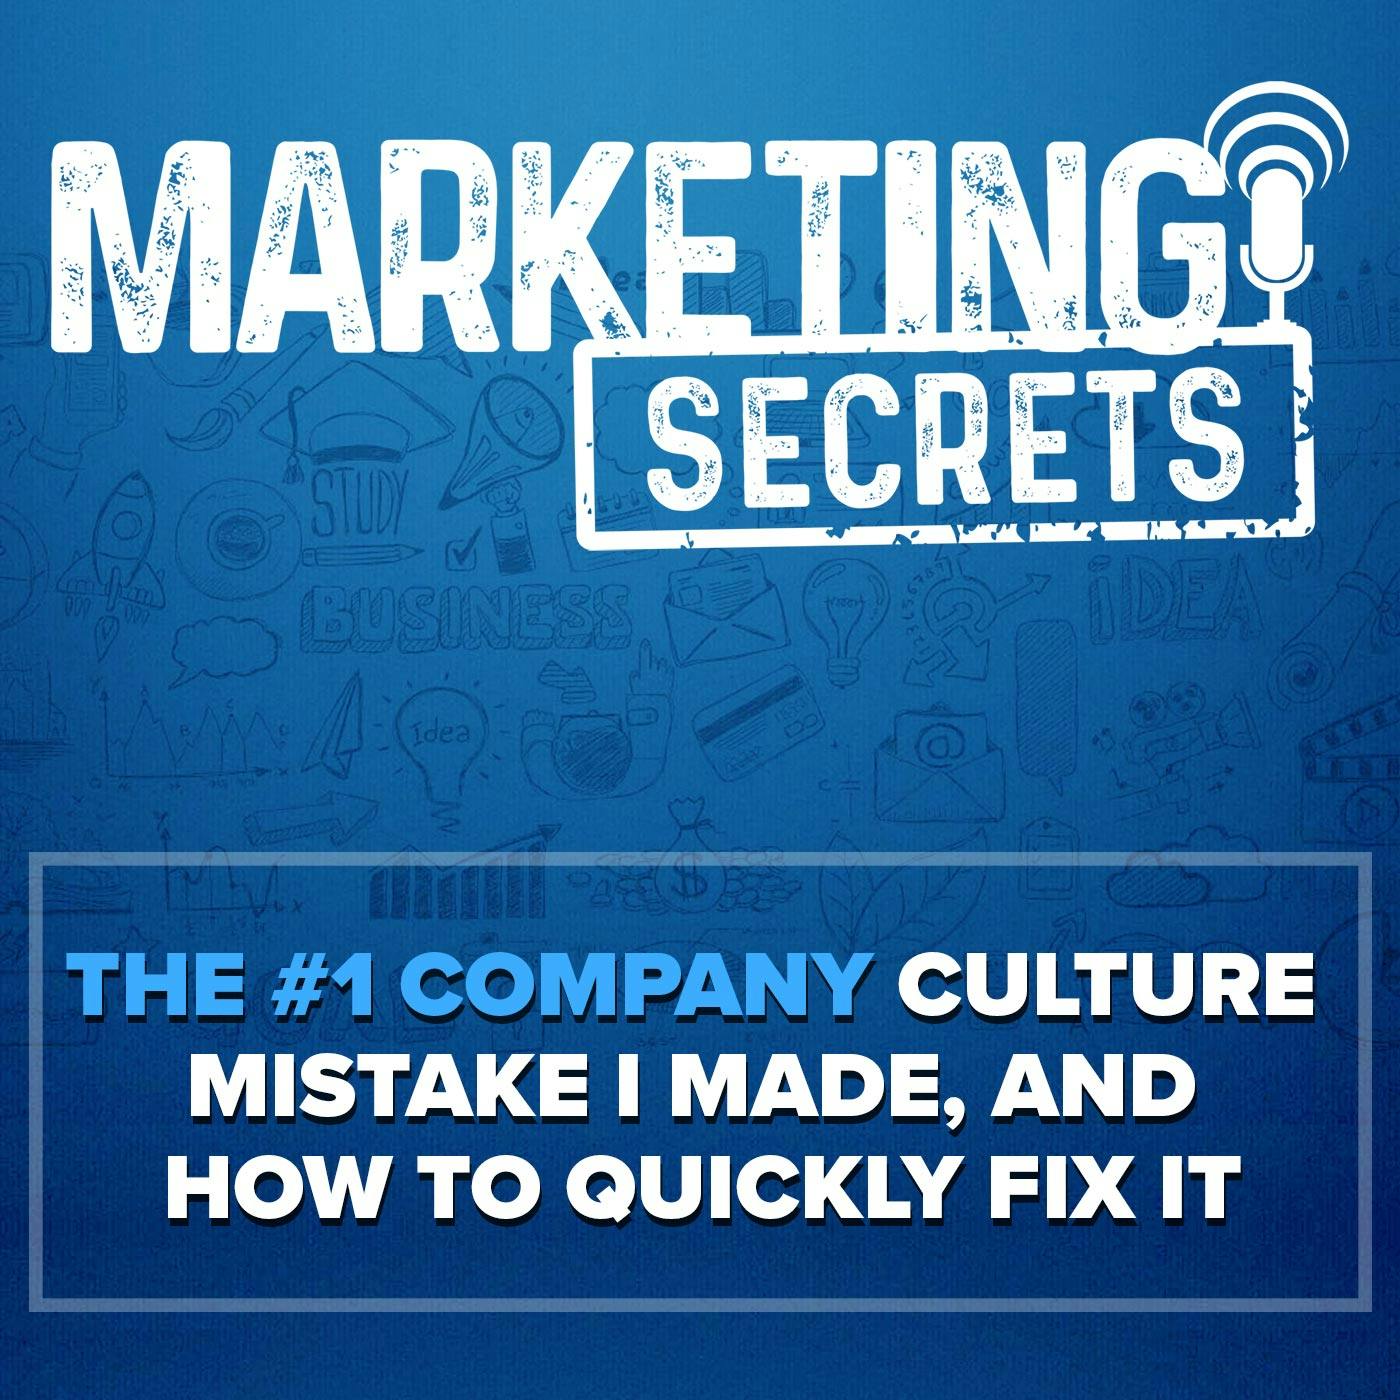 The #1 Company Culture Mistake I Made, And How To Quickly Fix It